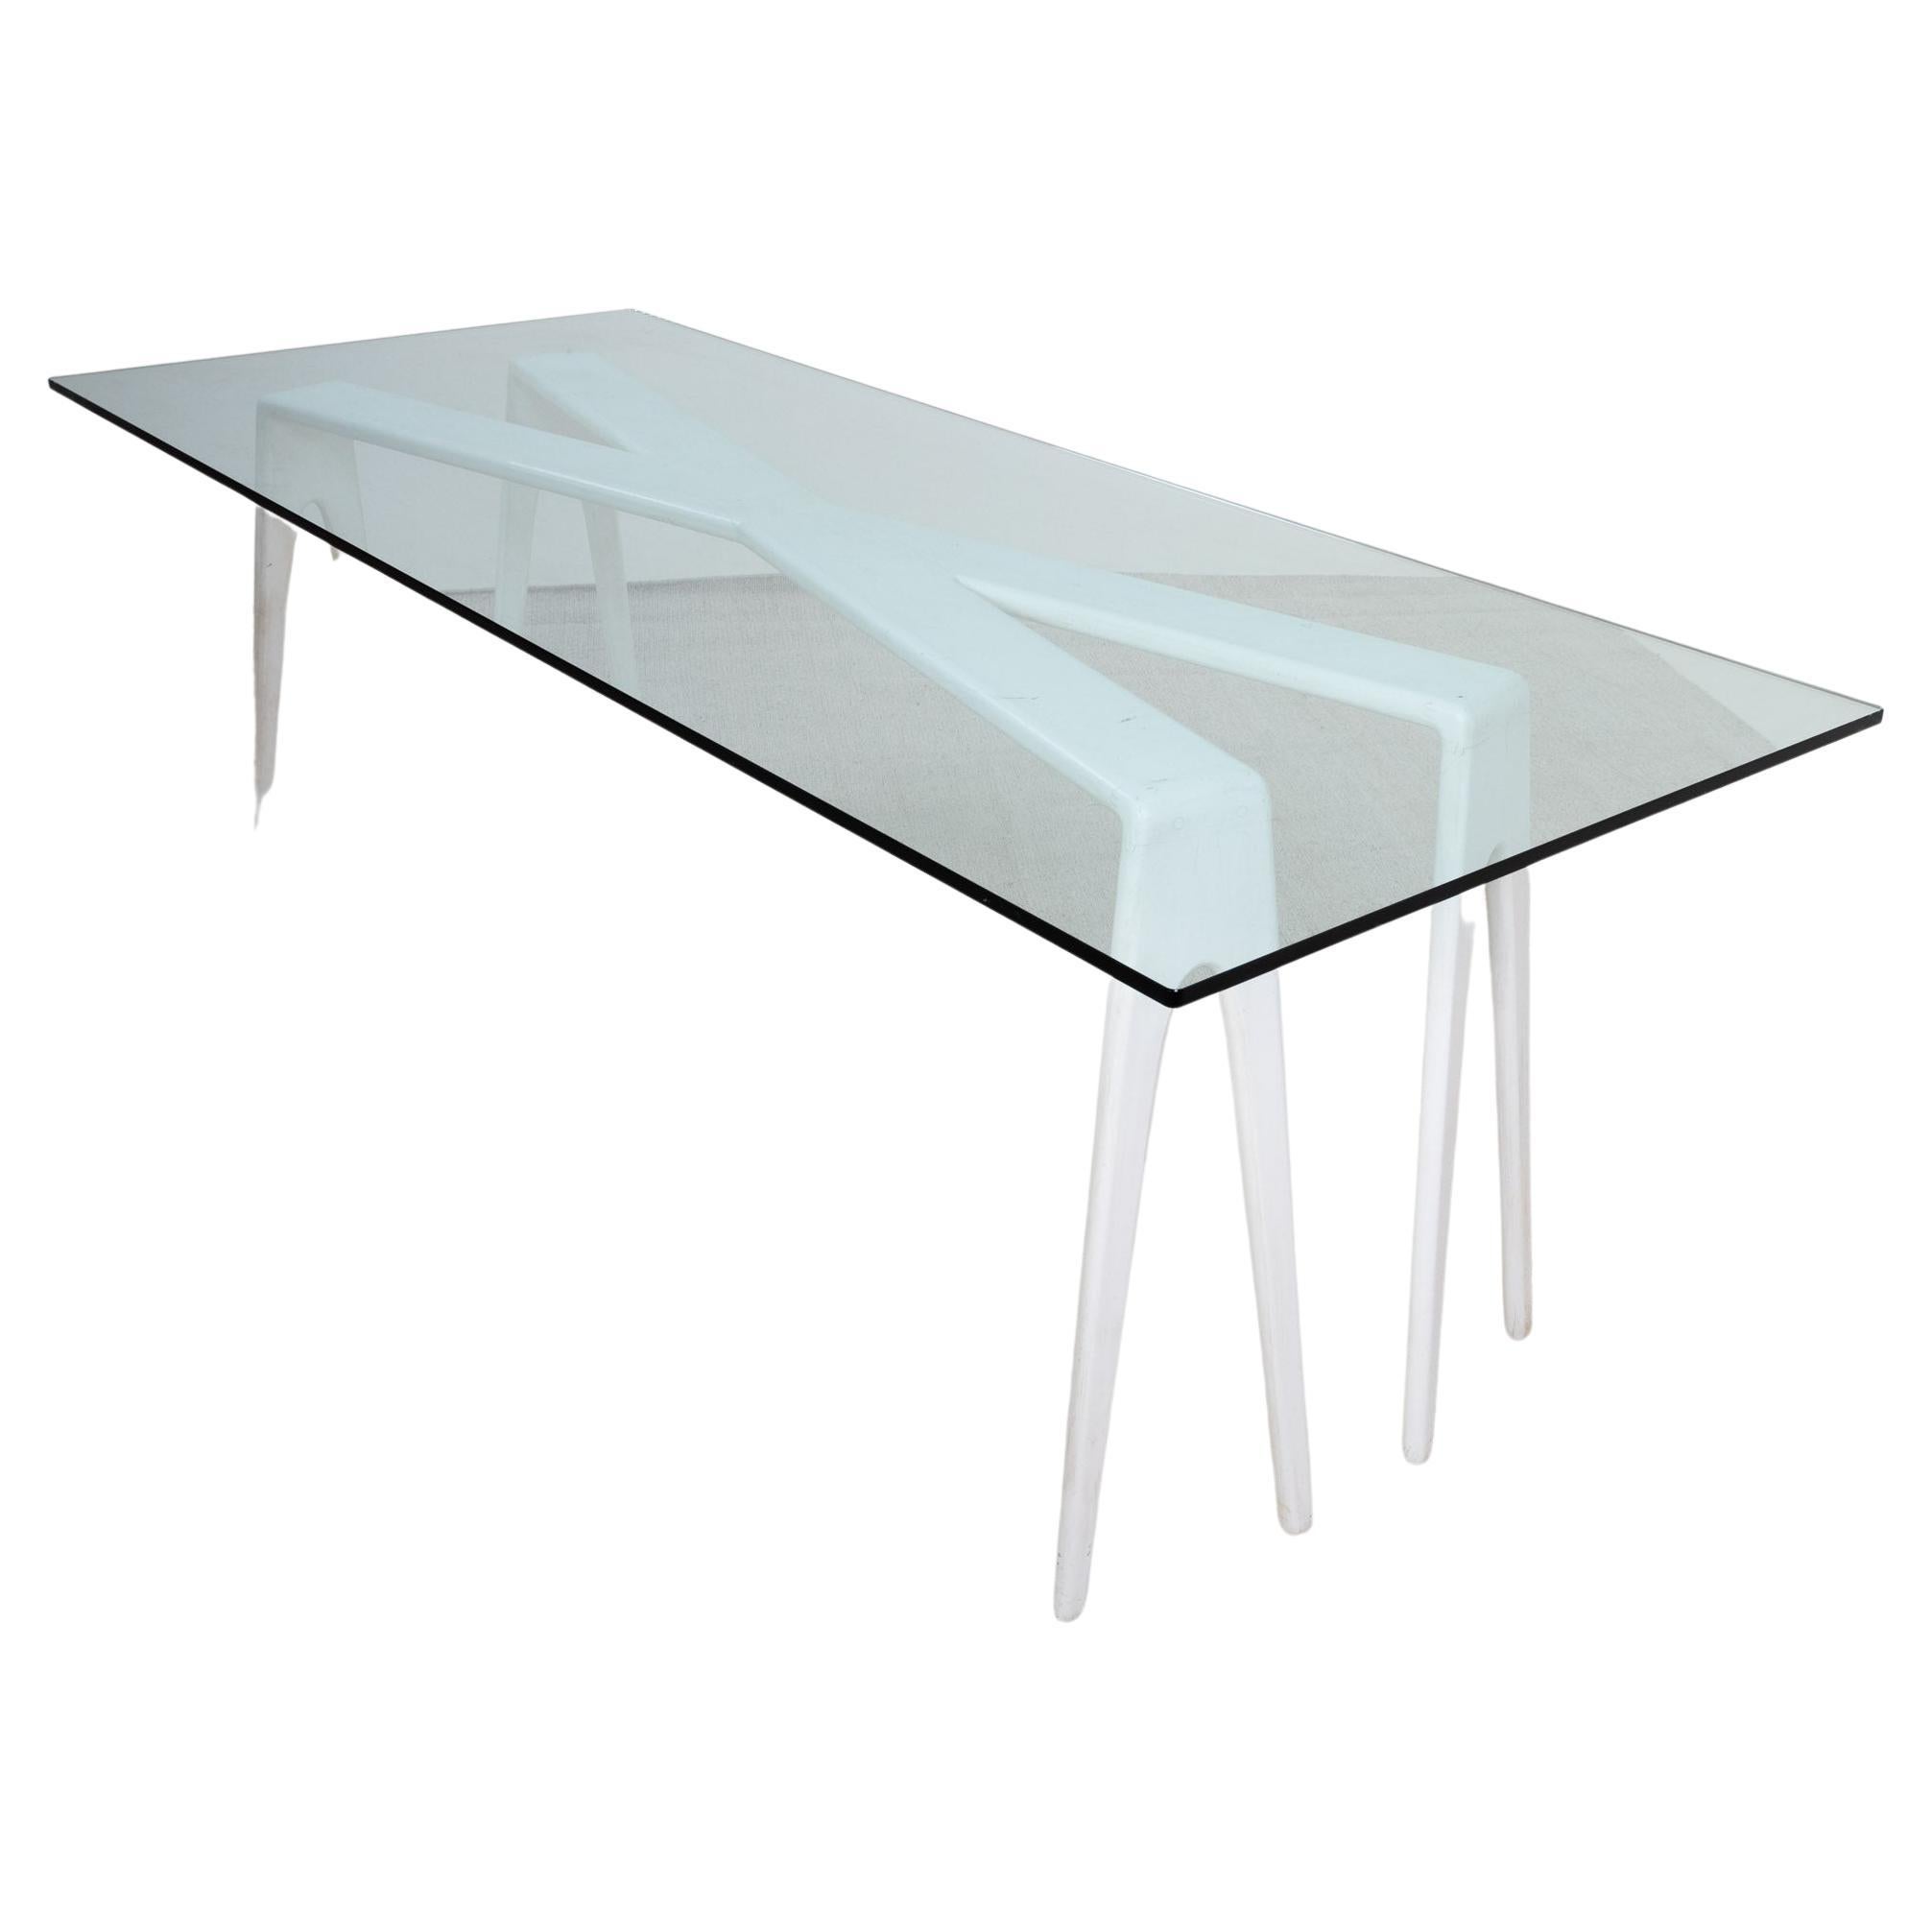 White Dining Table with Glass Top, Le Opere E i Giorni, Italy 20th Century For Sale